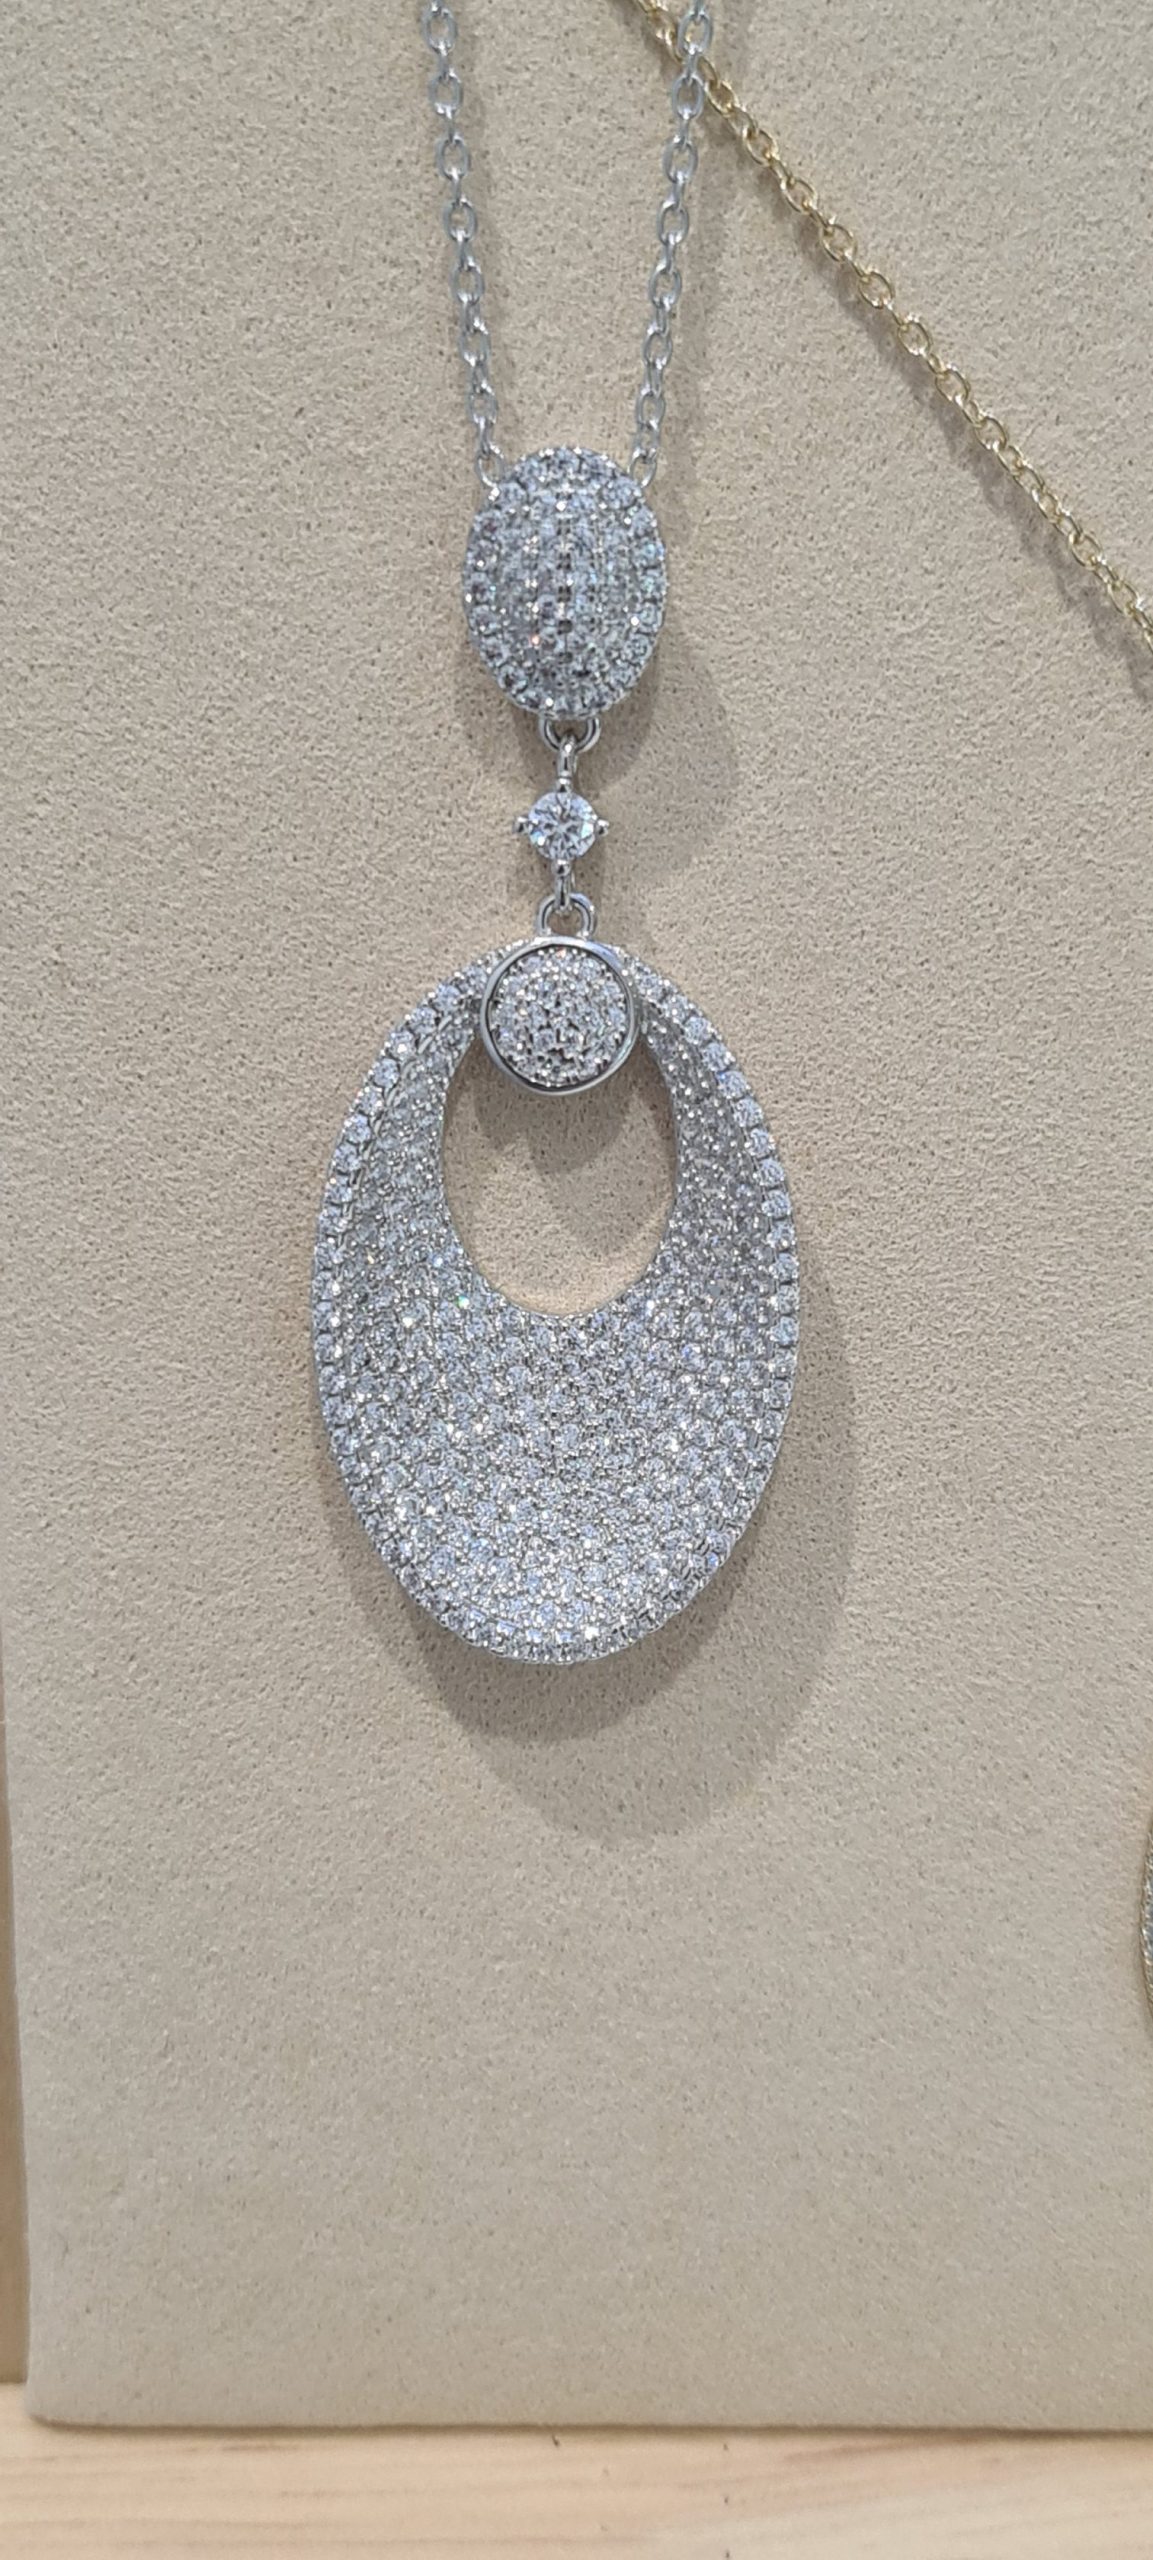 Rhodium Plated Necklace Oval Sharped Pendant